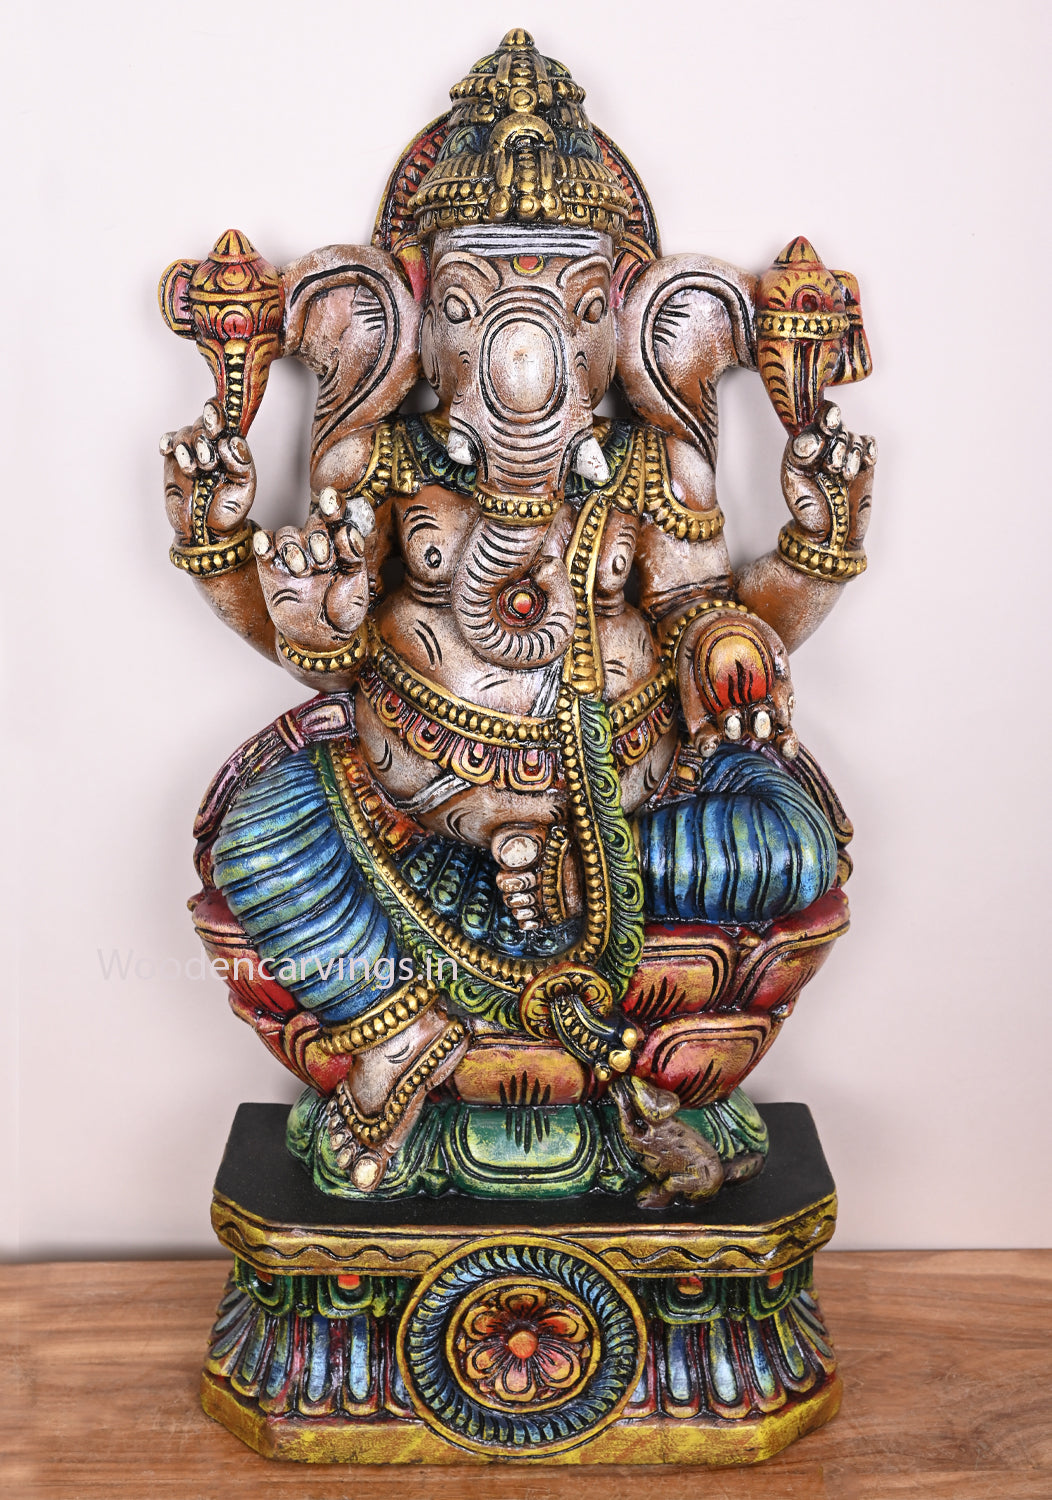 Colourful Double Petal Lotus Lord Ganesh For Your Pooja Room Decorations Wooden Handcraft Sculpture 31"